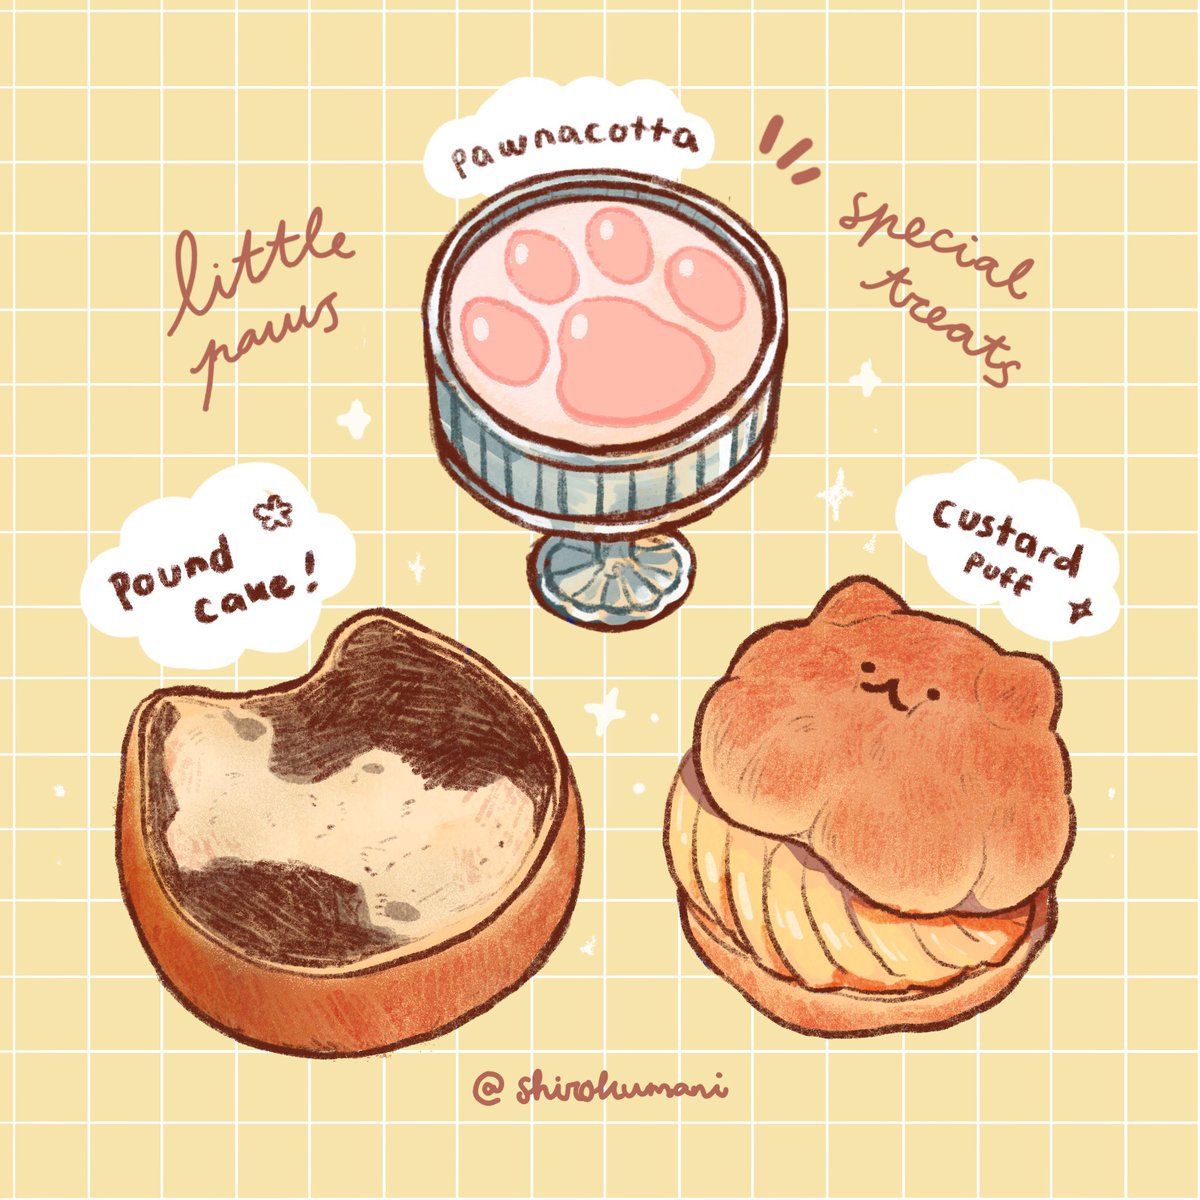 #cheftember ?? This tag is so cute omg.... hello I'm mani and i enjoy drawing food and shoobers 